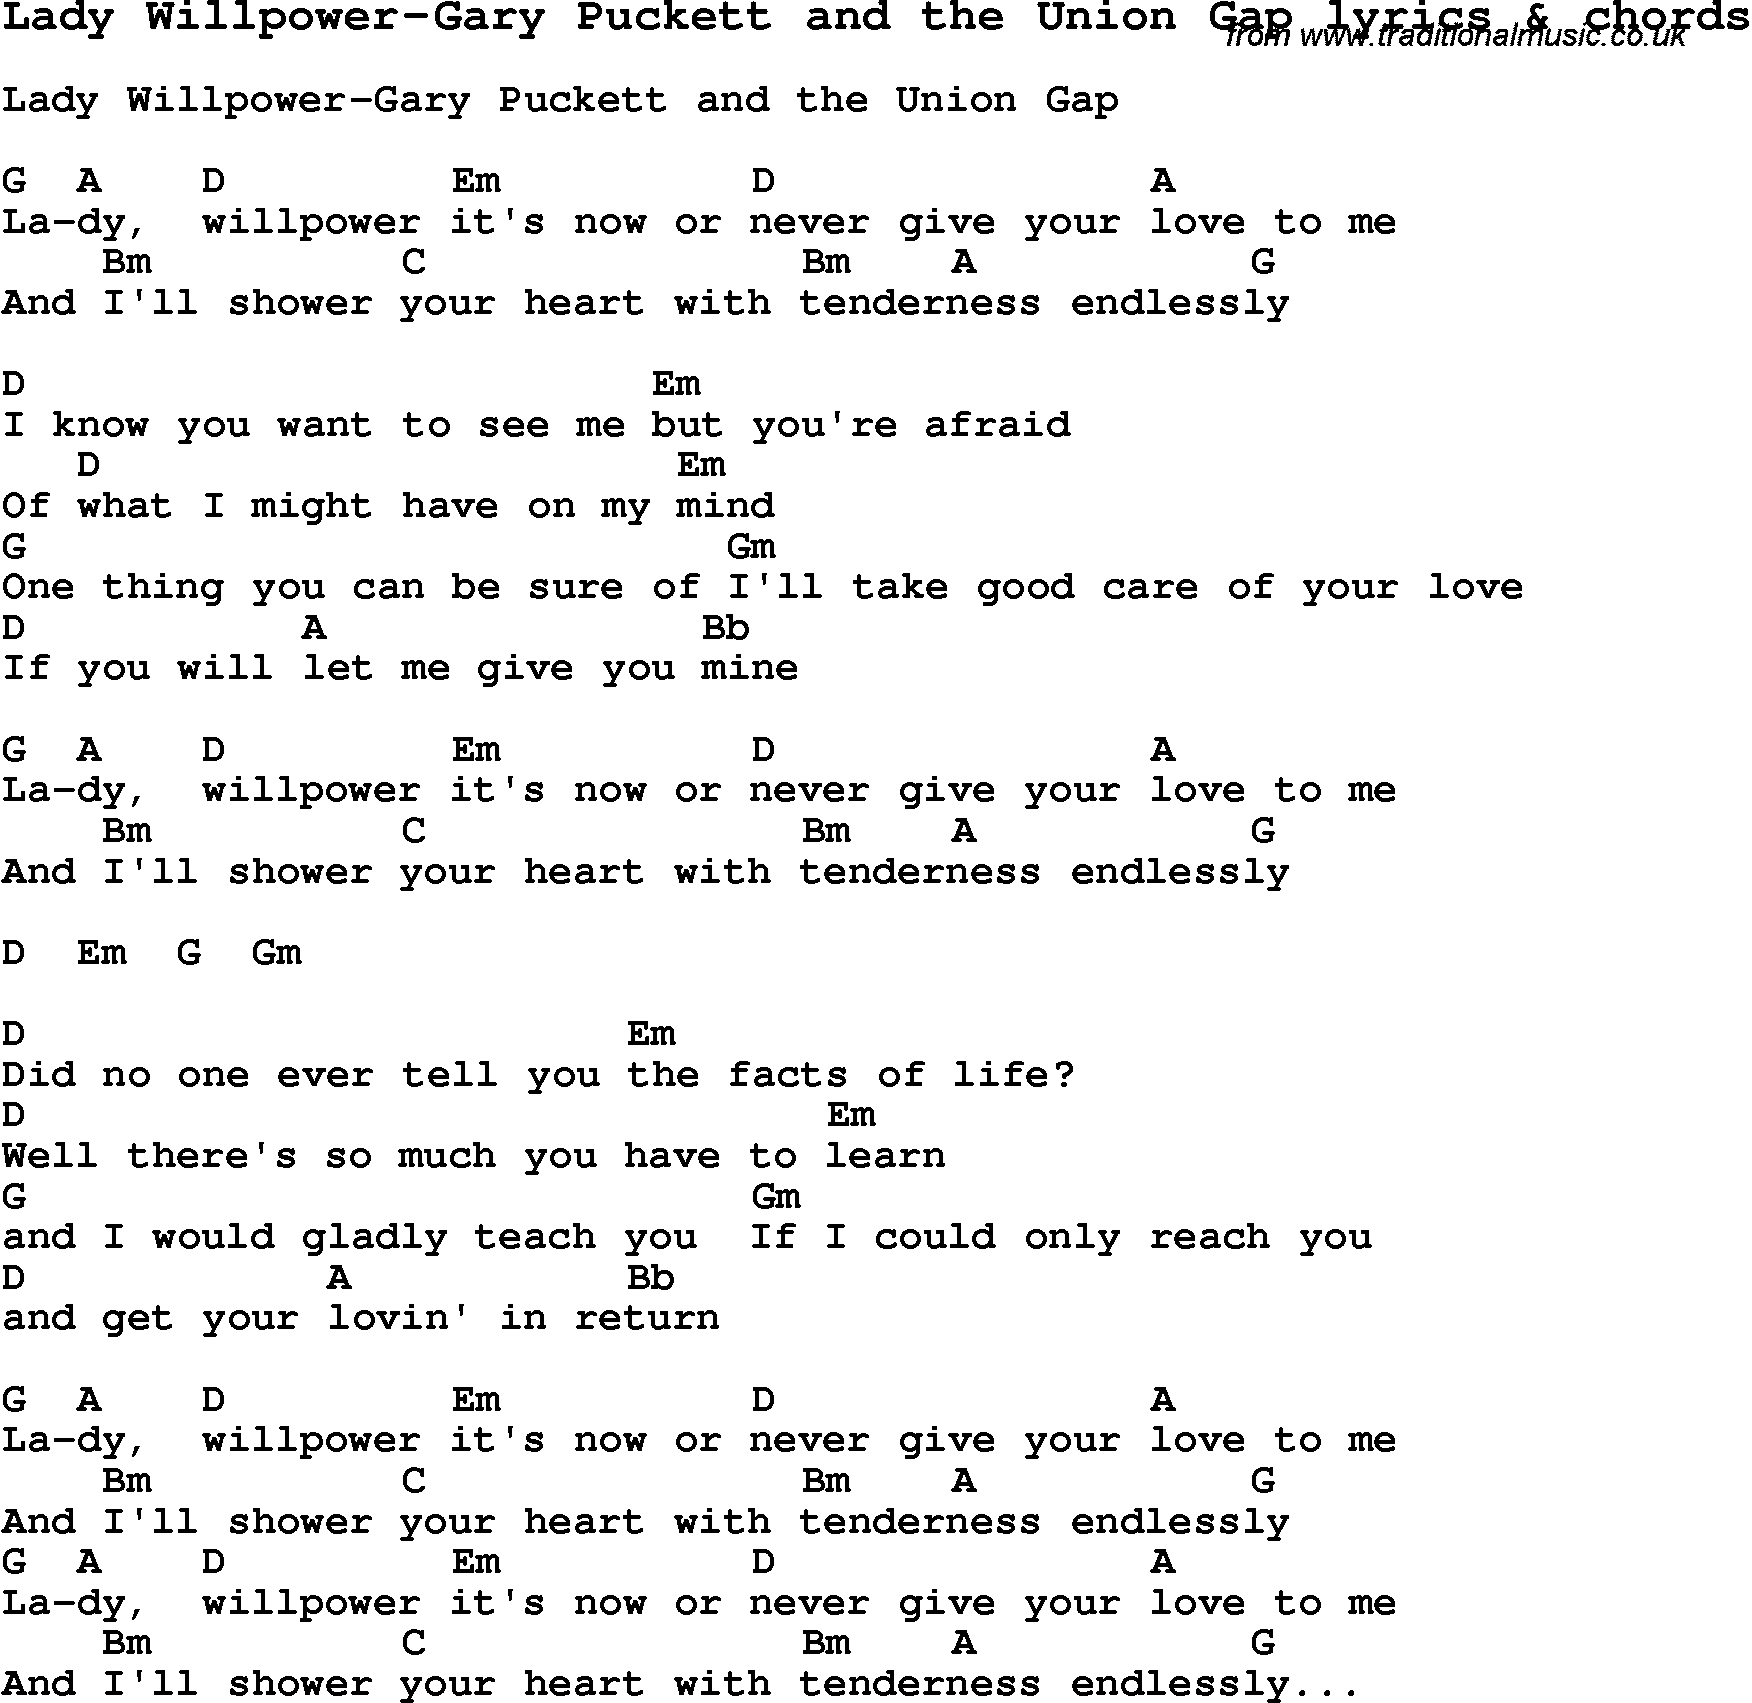 Love Song Lyrics for: Lady Willpower-Gary Puckett and the Union Gap with chords for Ukulele, Guitar Banjo etc.